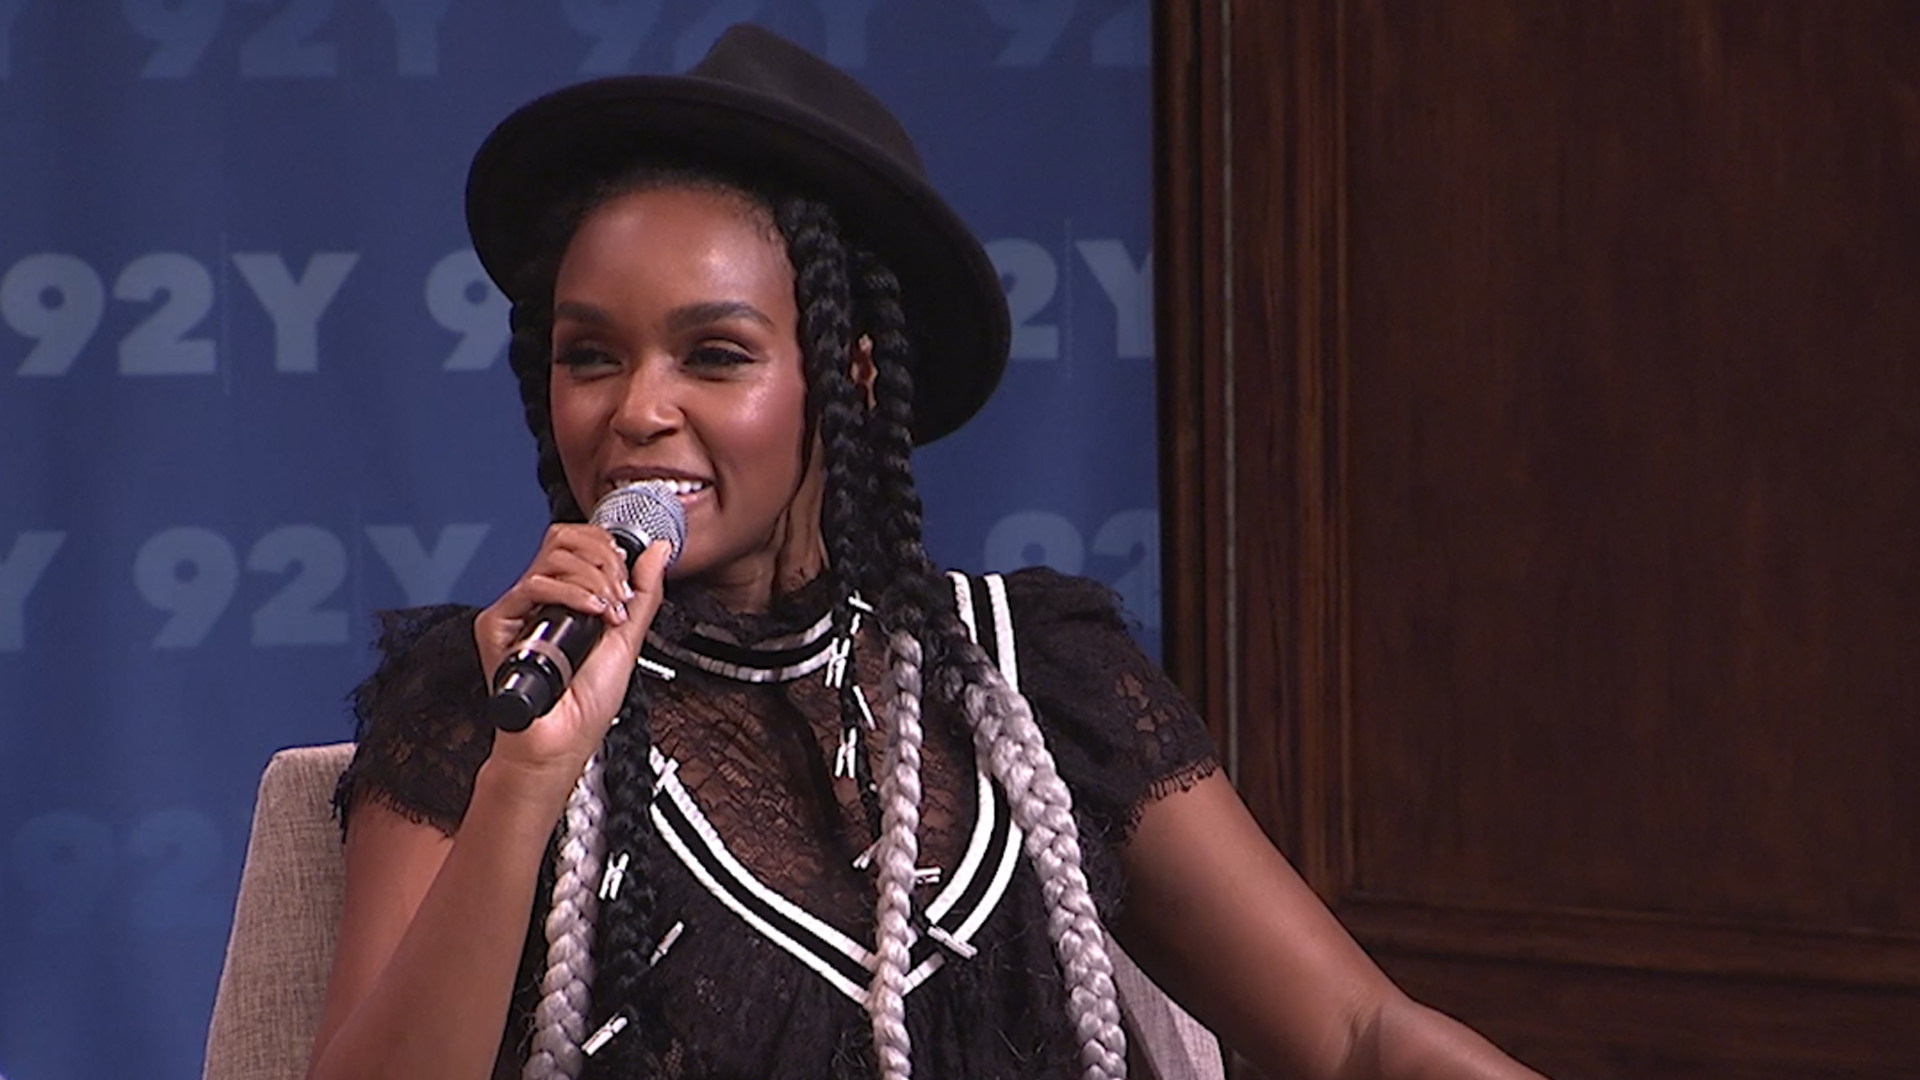 Janelle Monáe on the 2018 election and the future